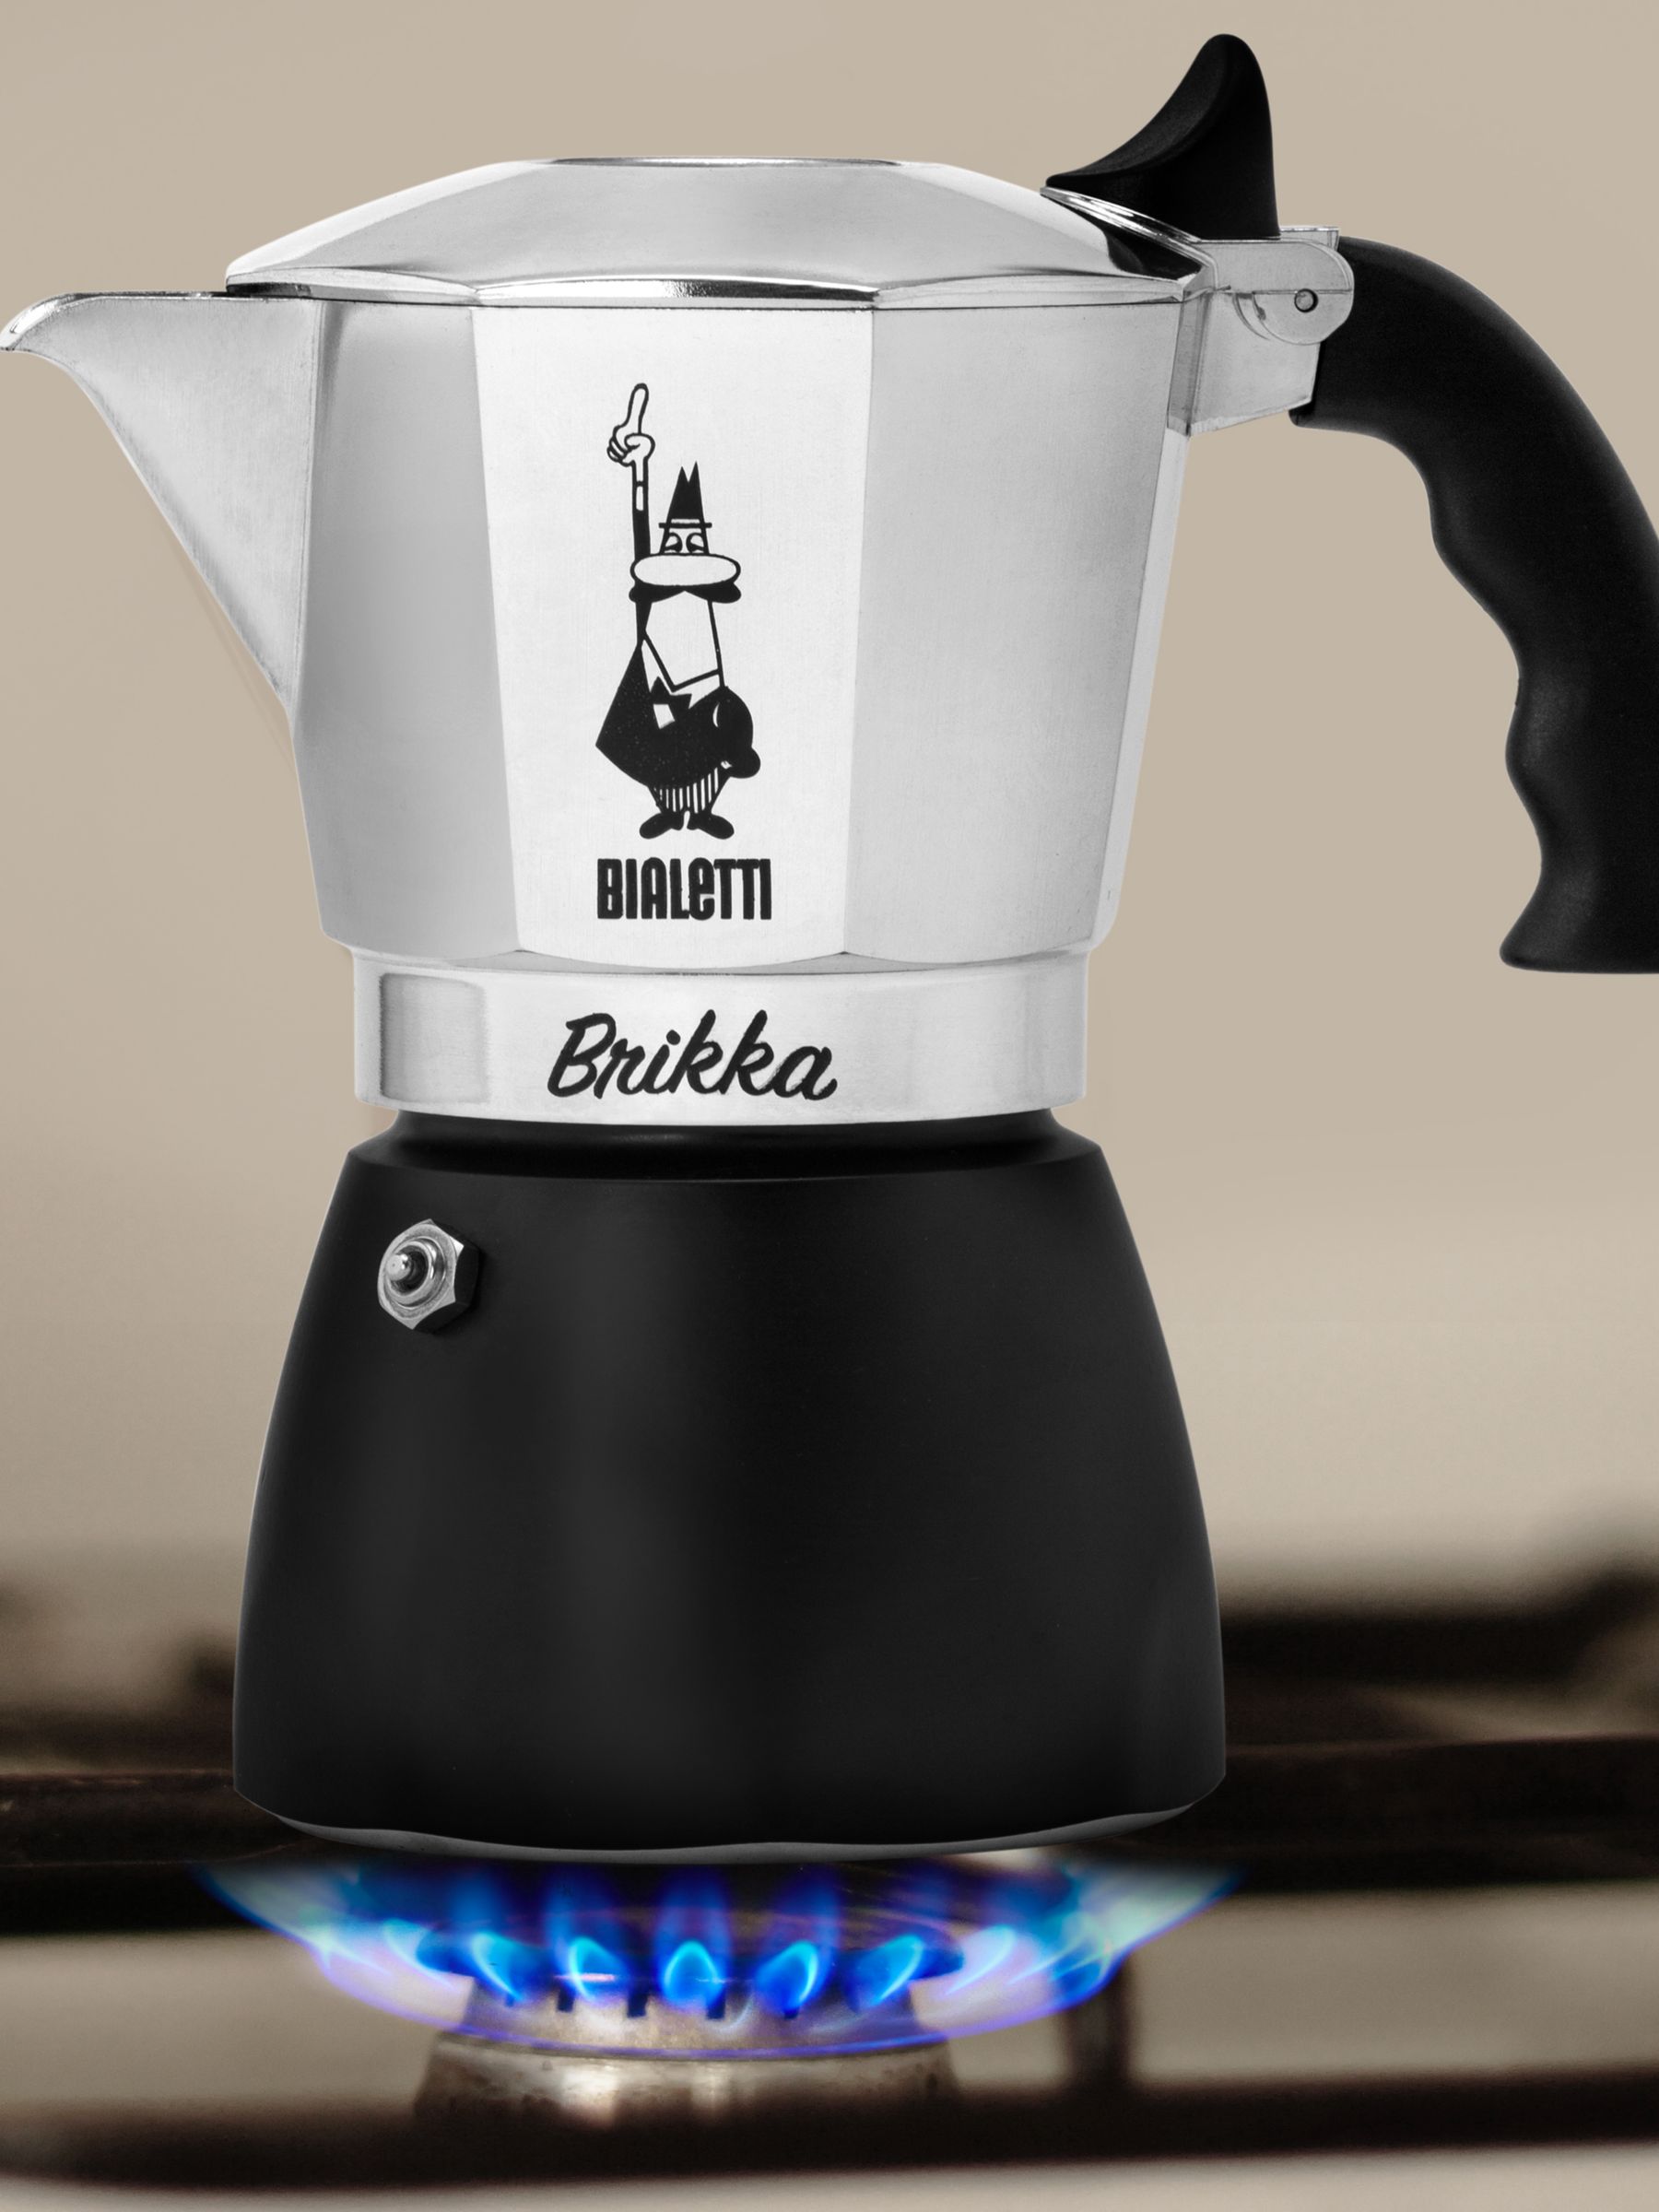 Bialetti New Brikka Induction 4 Cups Coffee Maker Fitted The Tops Induction